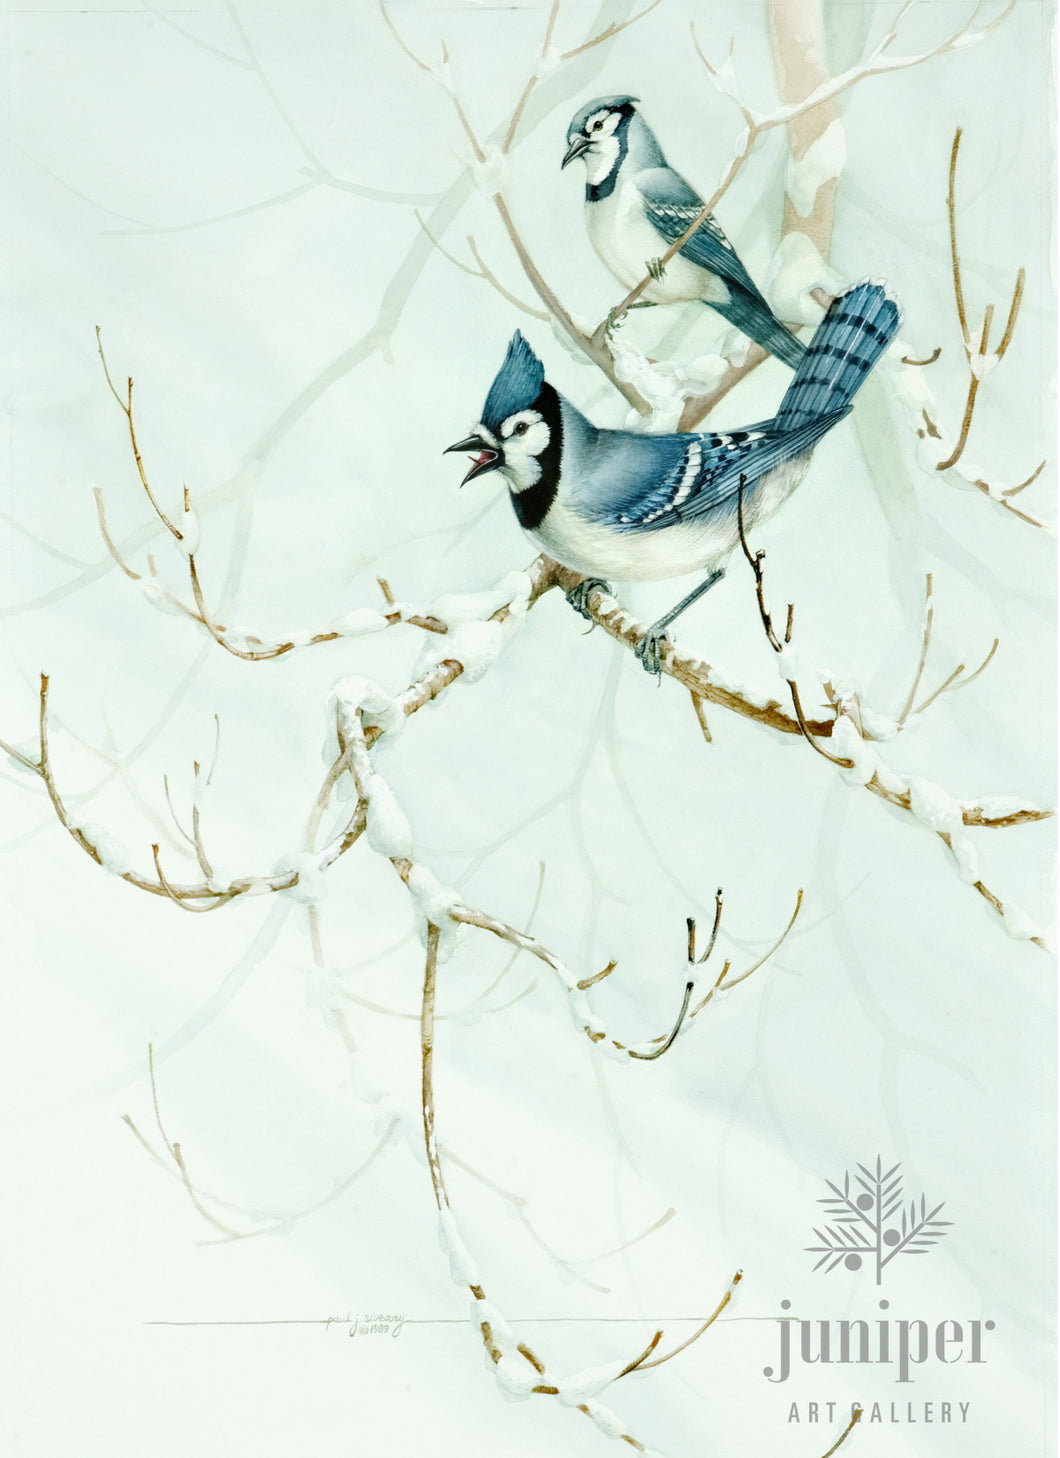 Winter Jays, giclee reproduction from original watercolor (1989) by Paul J Sweany